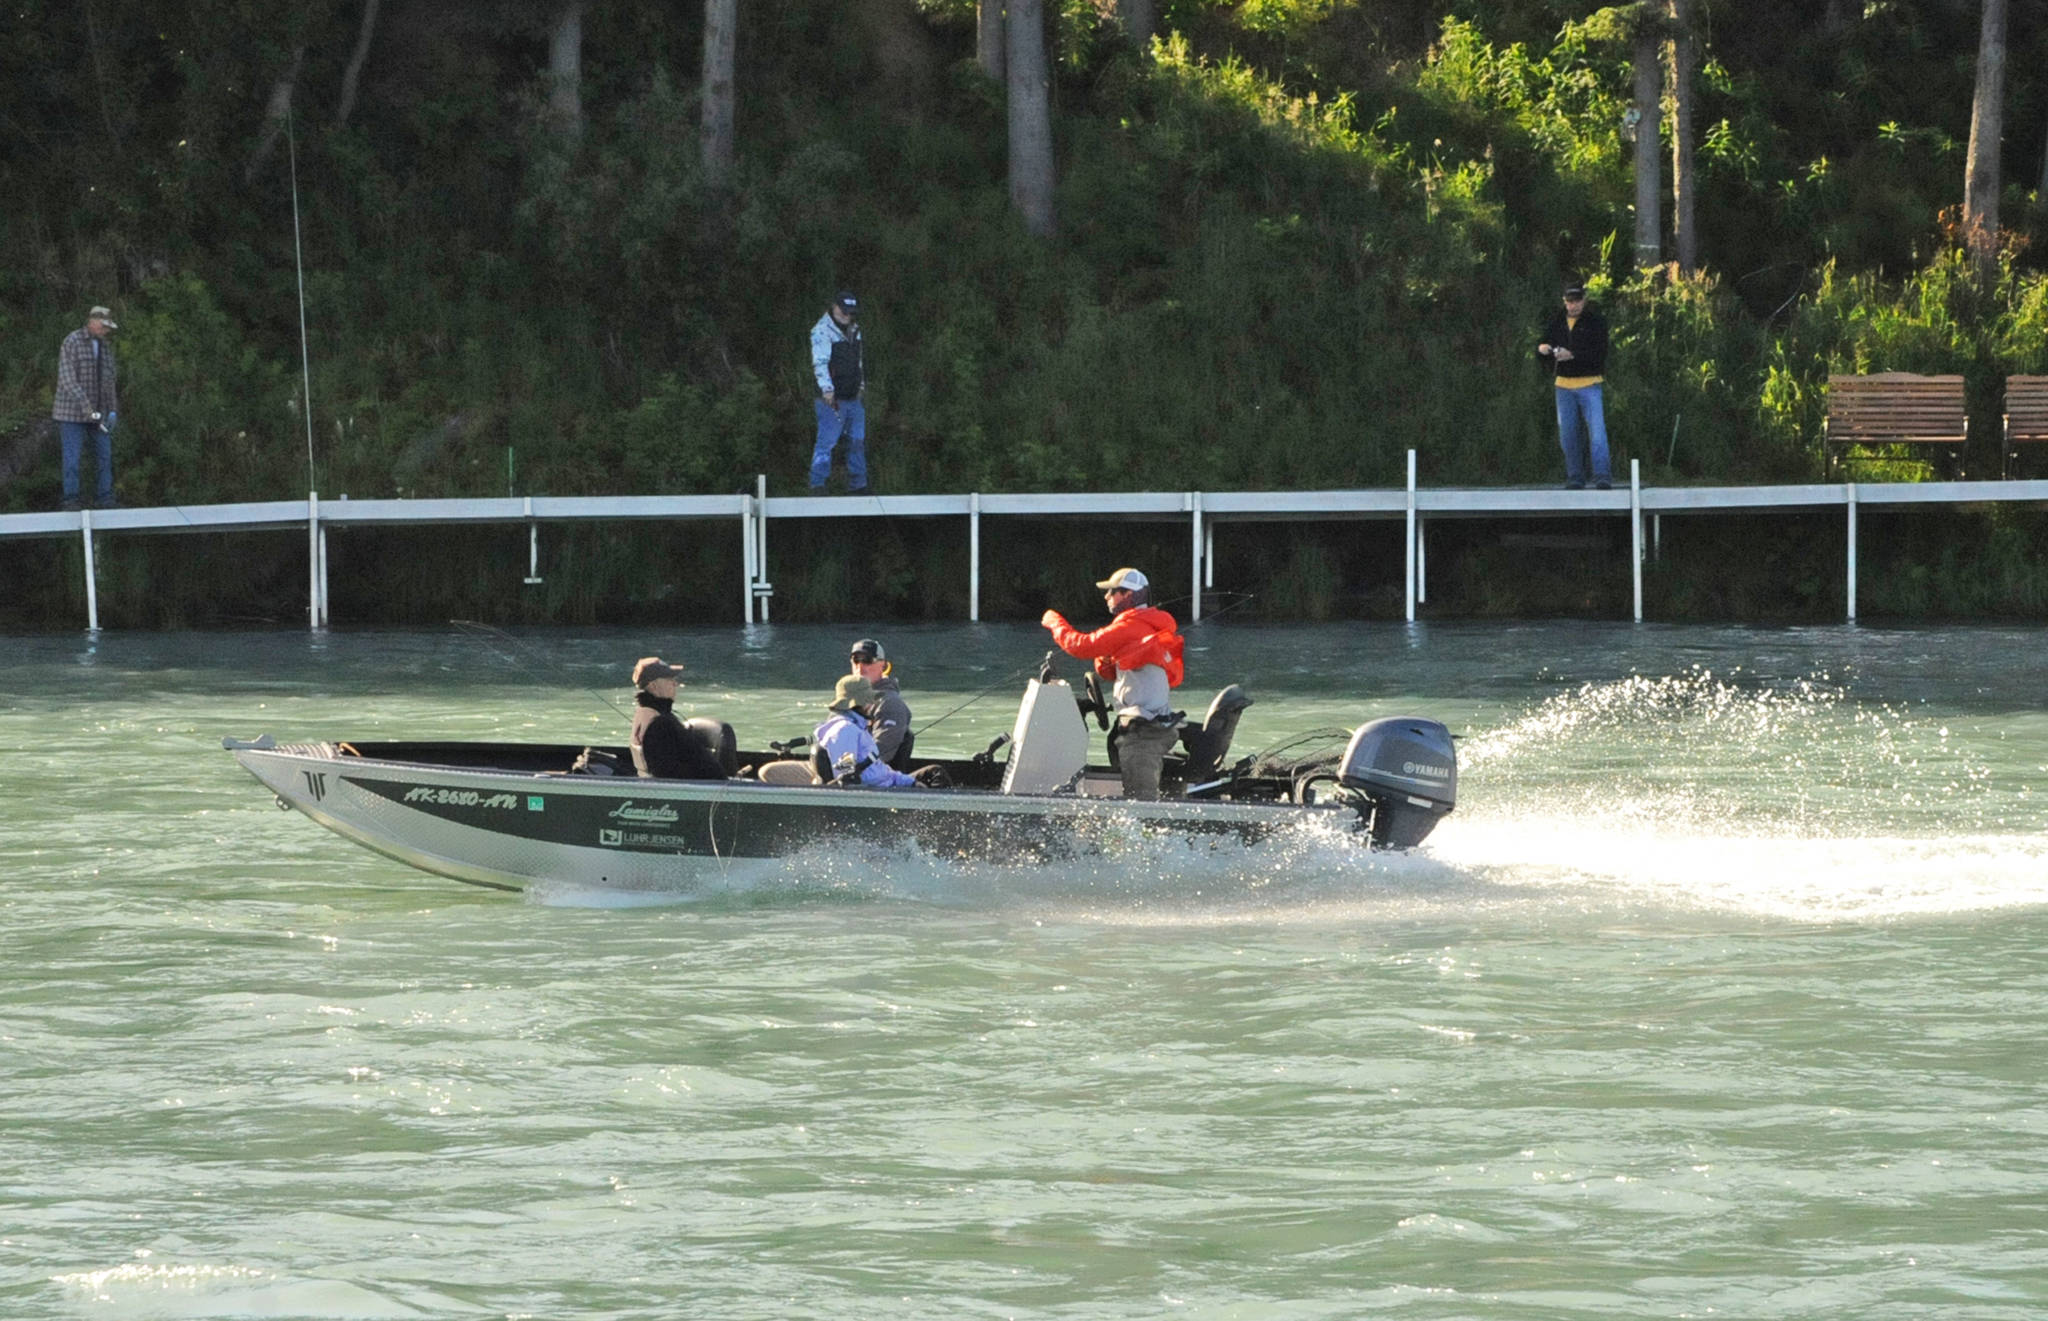 Anglers powerboat up the Kenai River near Soldotna Creek Park on Wednesday, July 18, 2018 in Soldotna, Alaska. The water in the Kenai River is a little higher than usual — about 9.71 feet, according to U.S. Geological Survey’s gauge at Soldotna — but has fallen since last week and is significantly below the flood stage of 12 feet. Anglers were hitting the banks on Wednesday morning for sockeye salmon, which normally peak in returning numbers to the Kenai River in mid-July. (Photo by Elizabeth Earl/Peninsula Clarion)